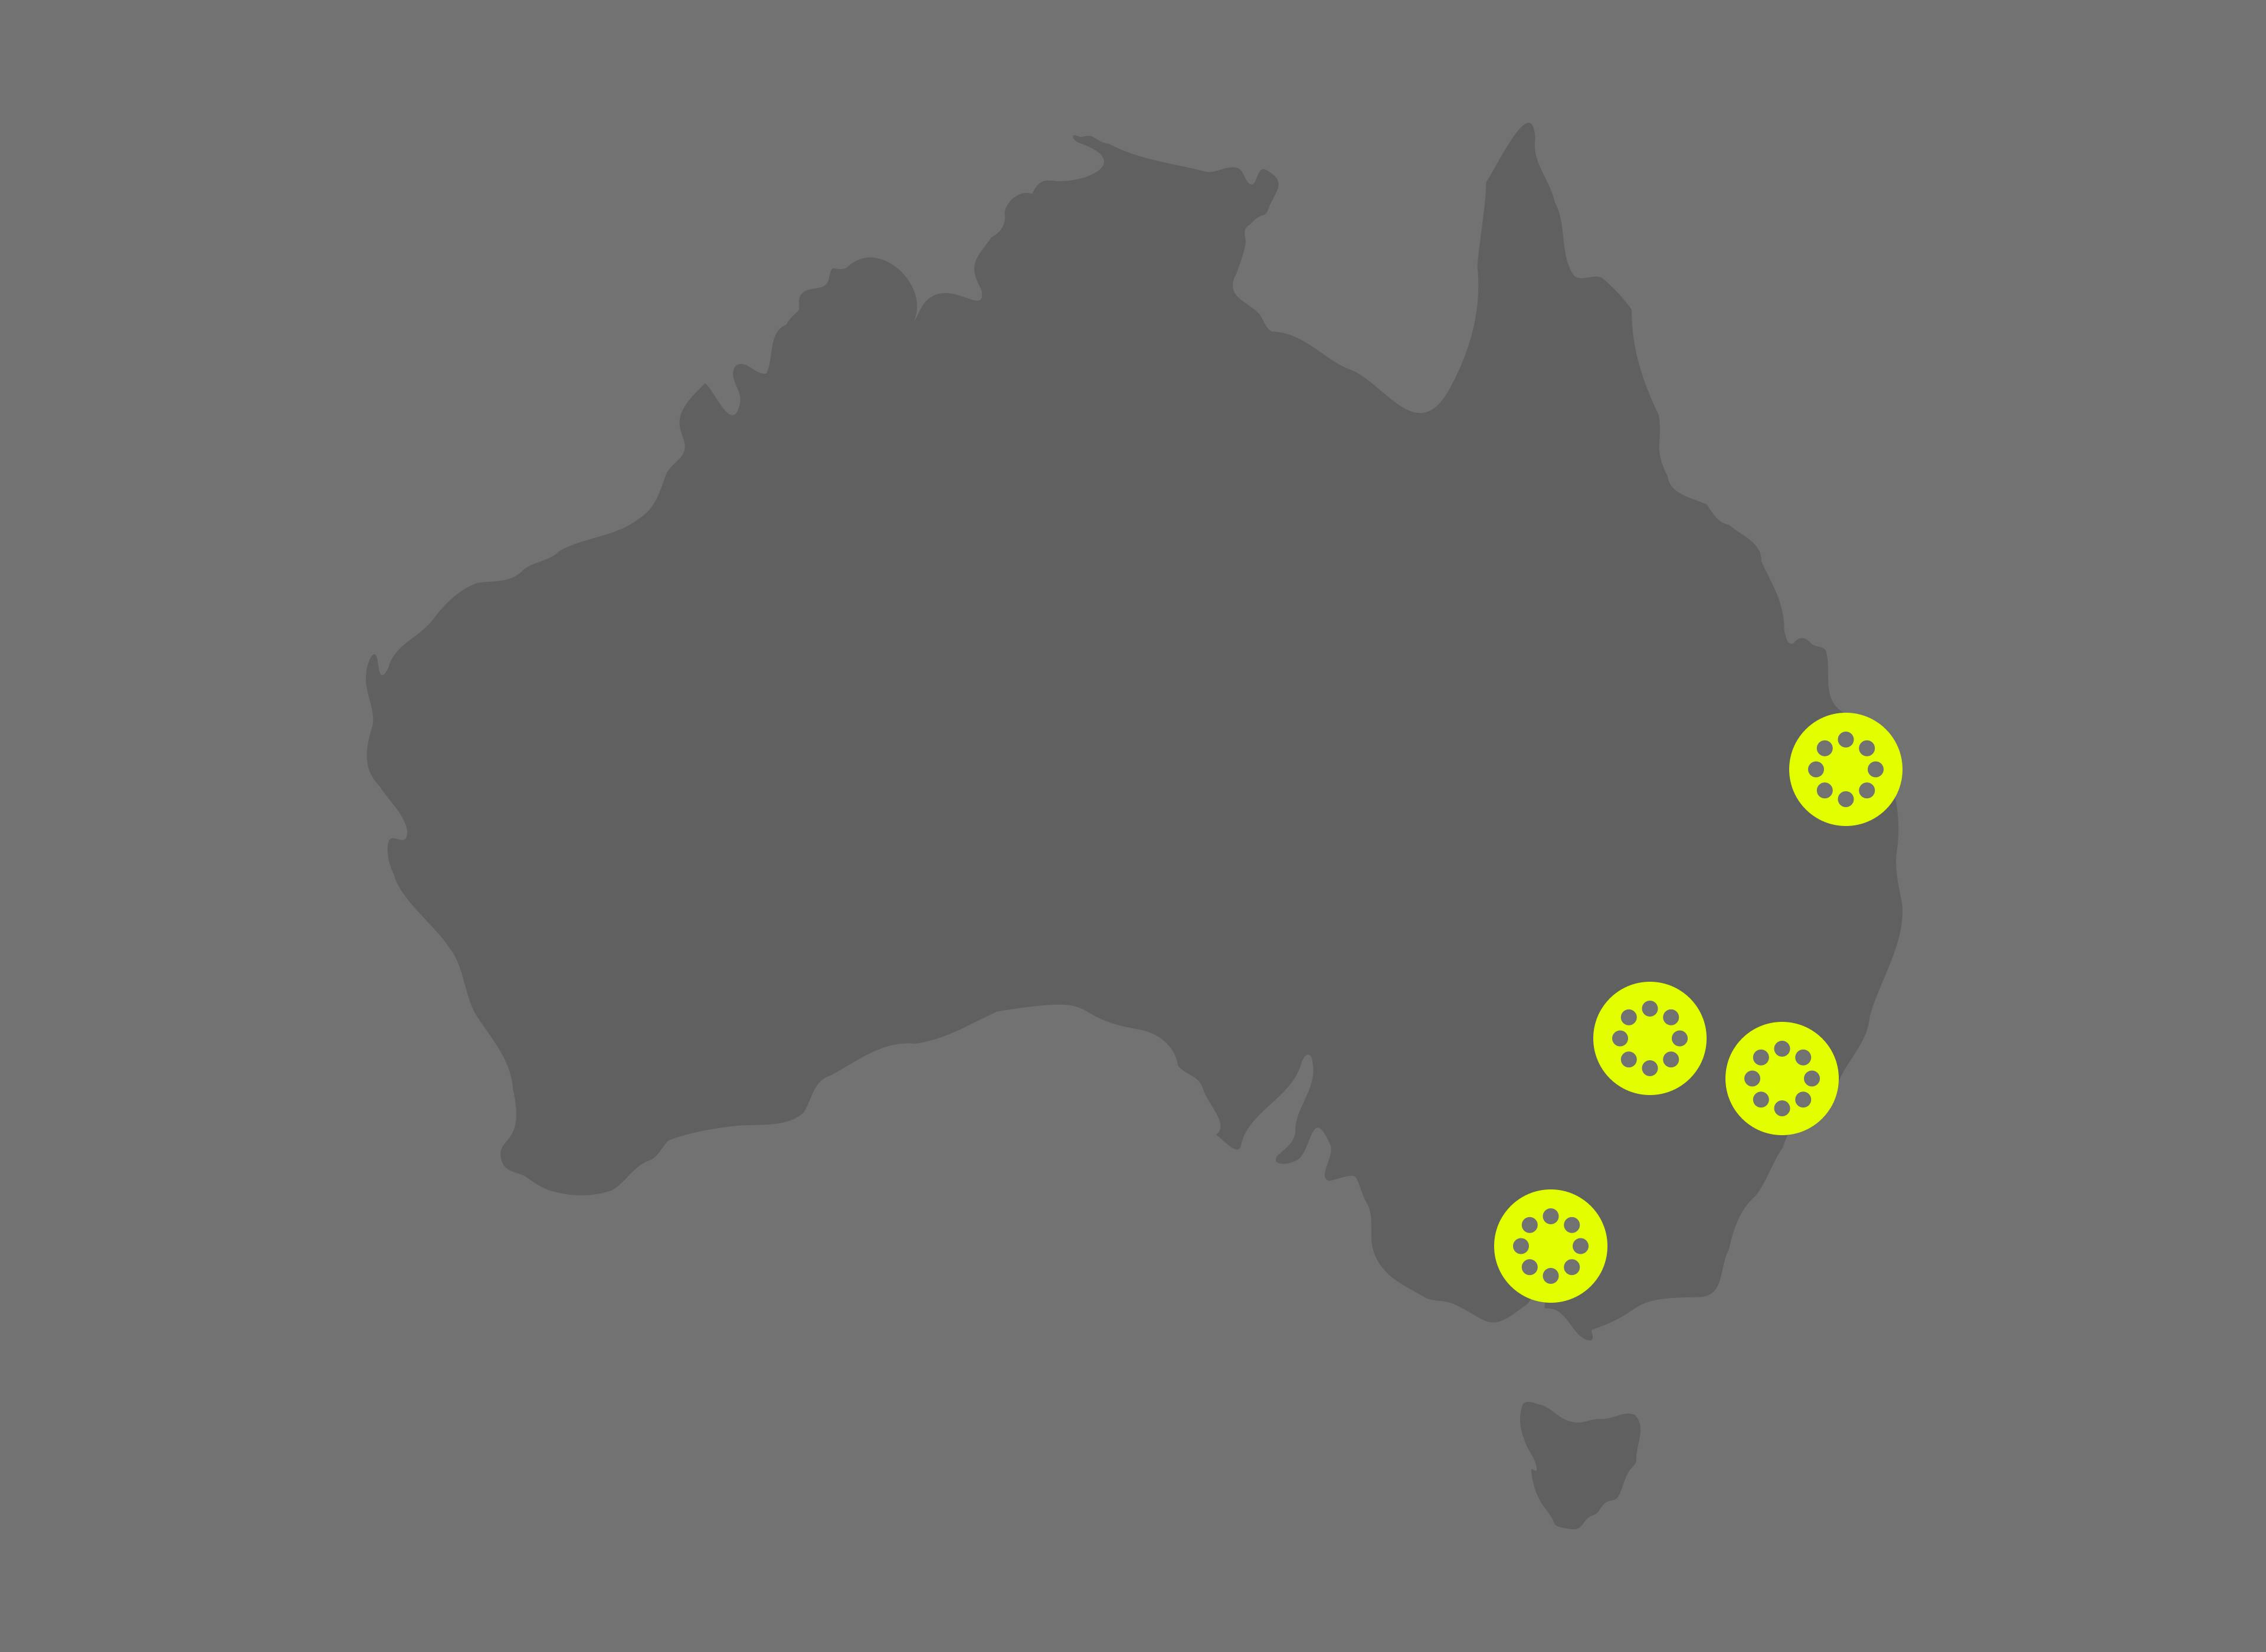 We now have six operational sites across Sydney, Victoria, Parkes (Regional NSW) and Brisbane.